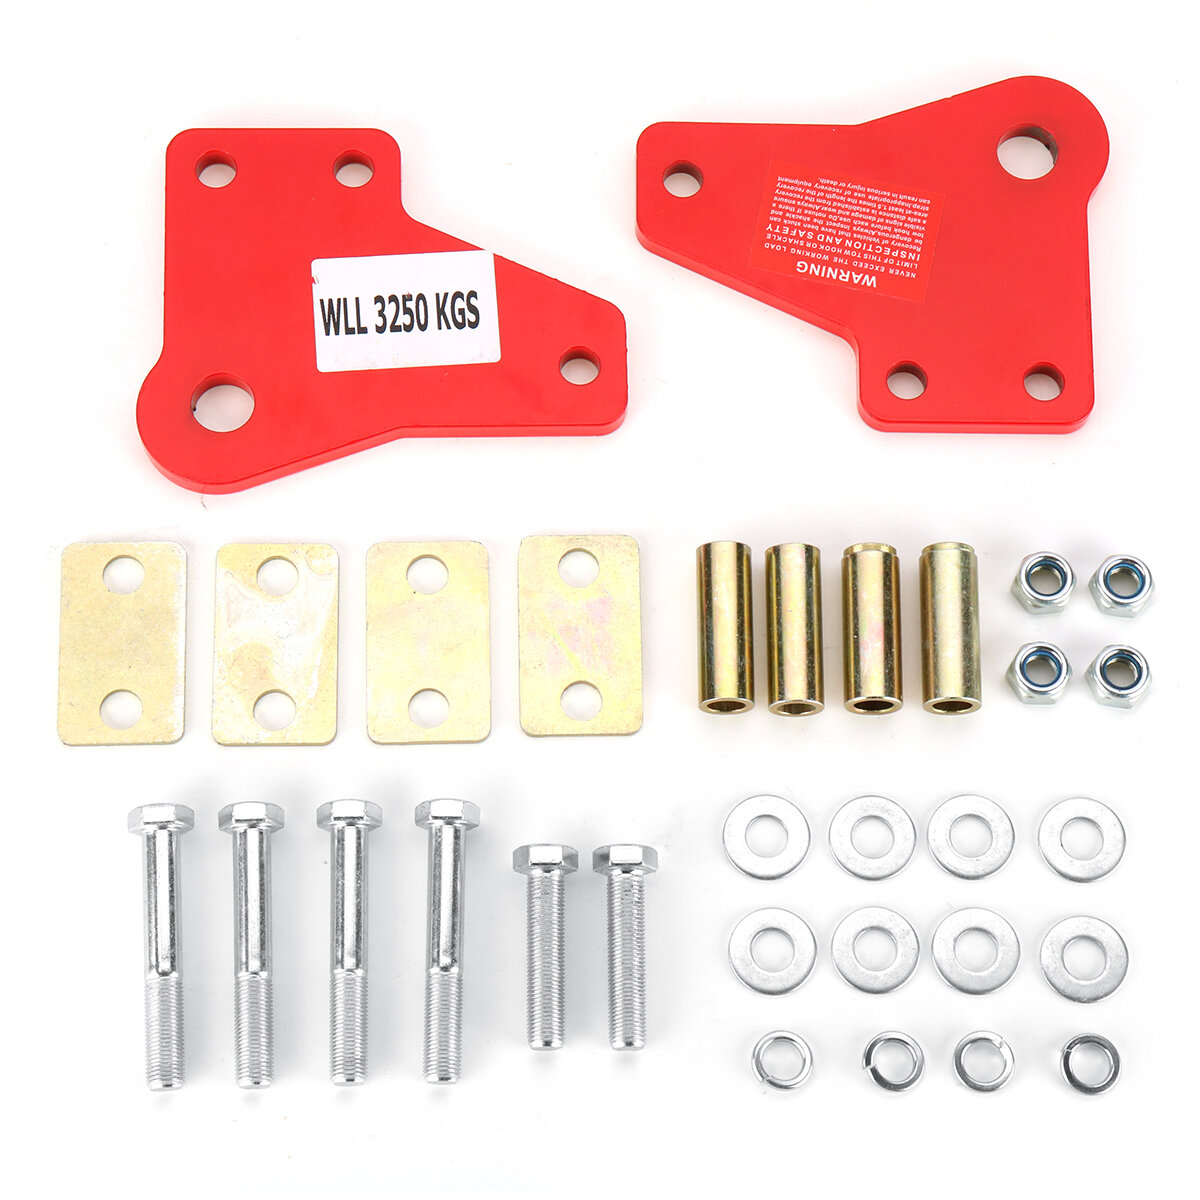 Image of 2pcs Front Recovery Tow Point Kit Pull Starter Kits 3250 KG For Toyota Hilux KUN26 N70 2005-2015